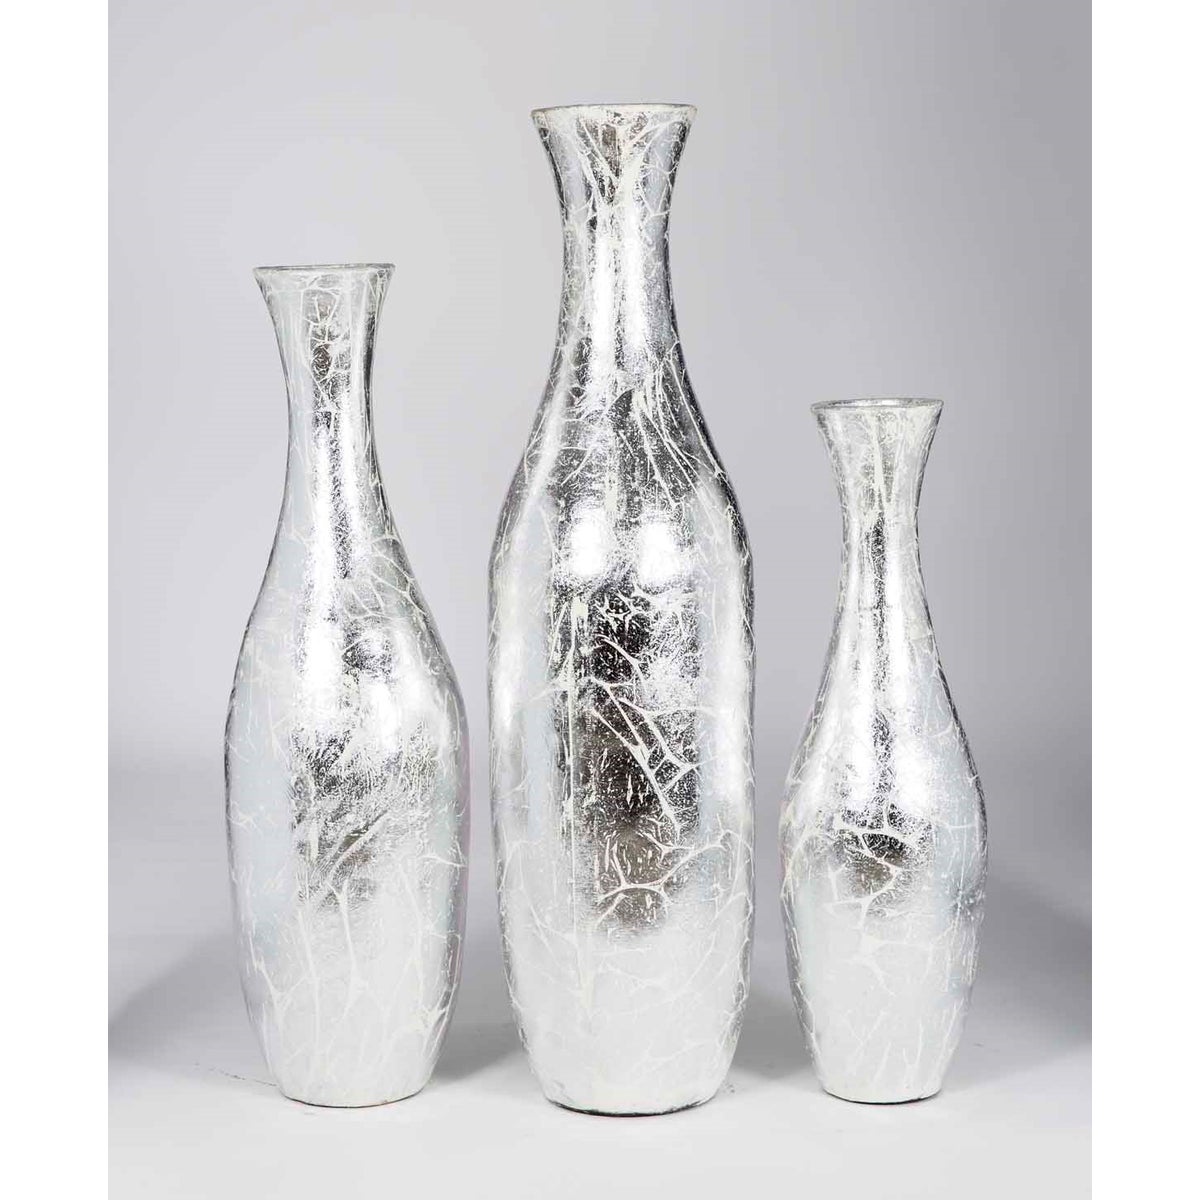 Set of 3 Floor Jugs in Silver Crackle Finish